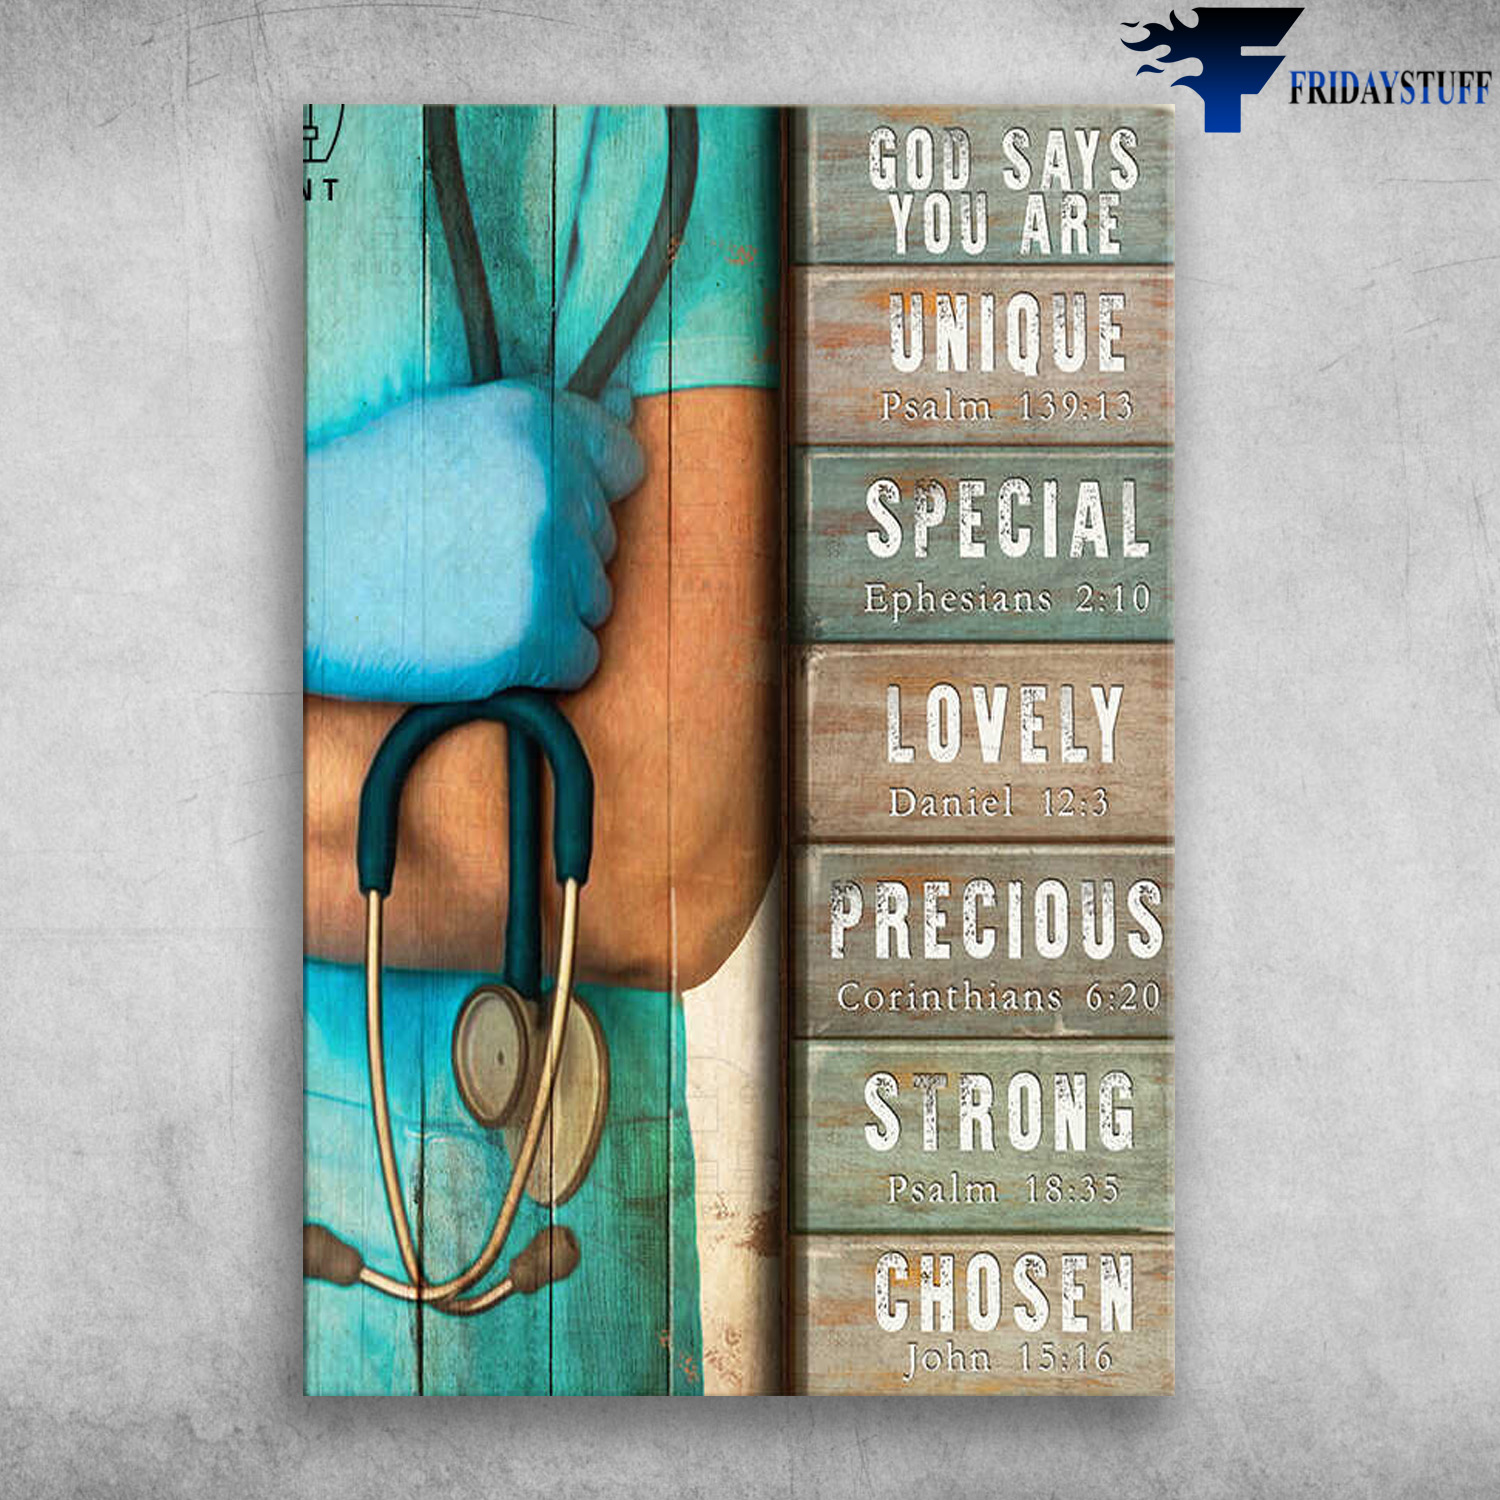 Nurse And Stethoscope - God Say You Are Unique, Special, Lovely, Precious, Strong, Chosen, Forgiven